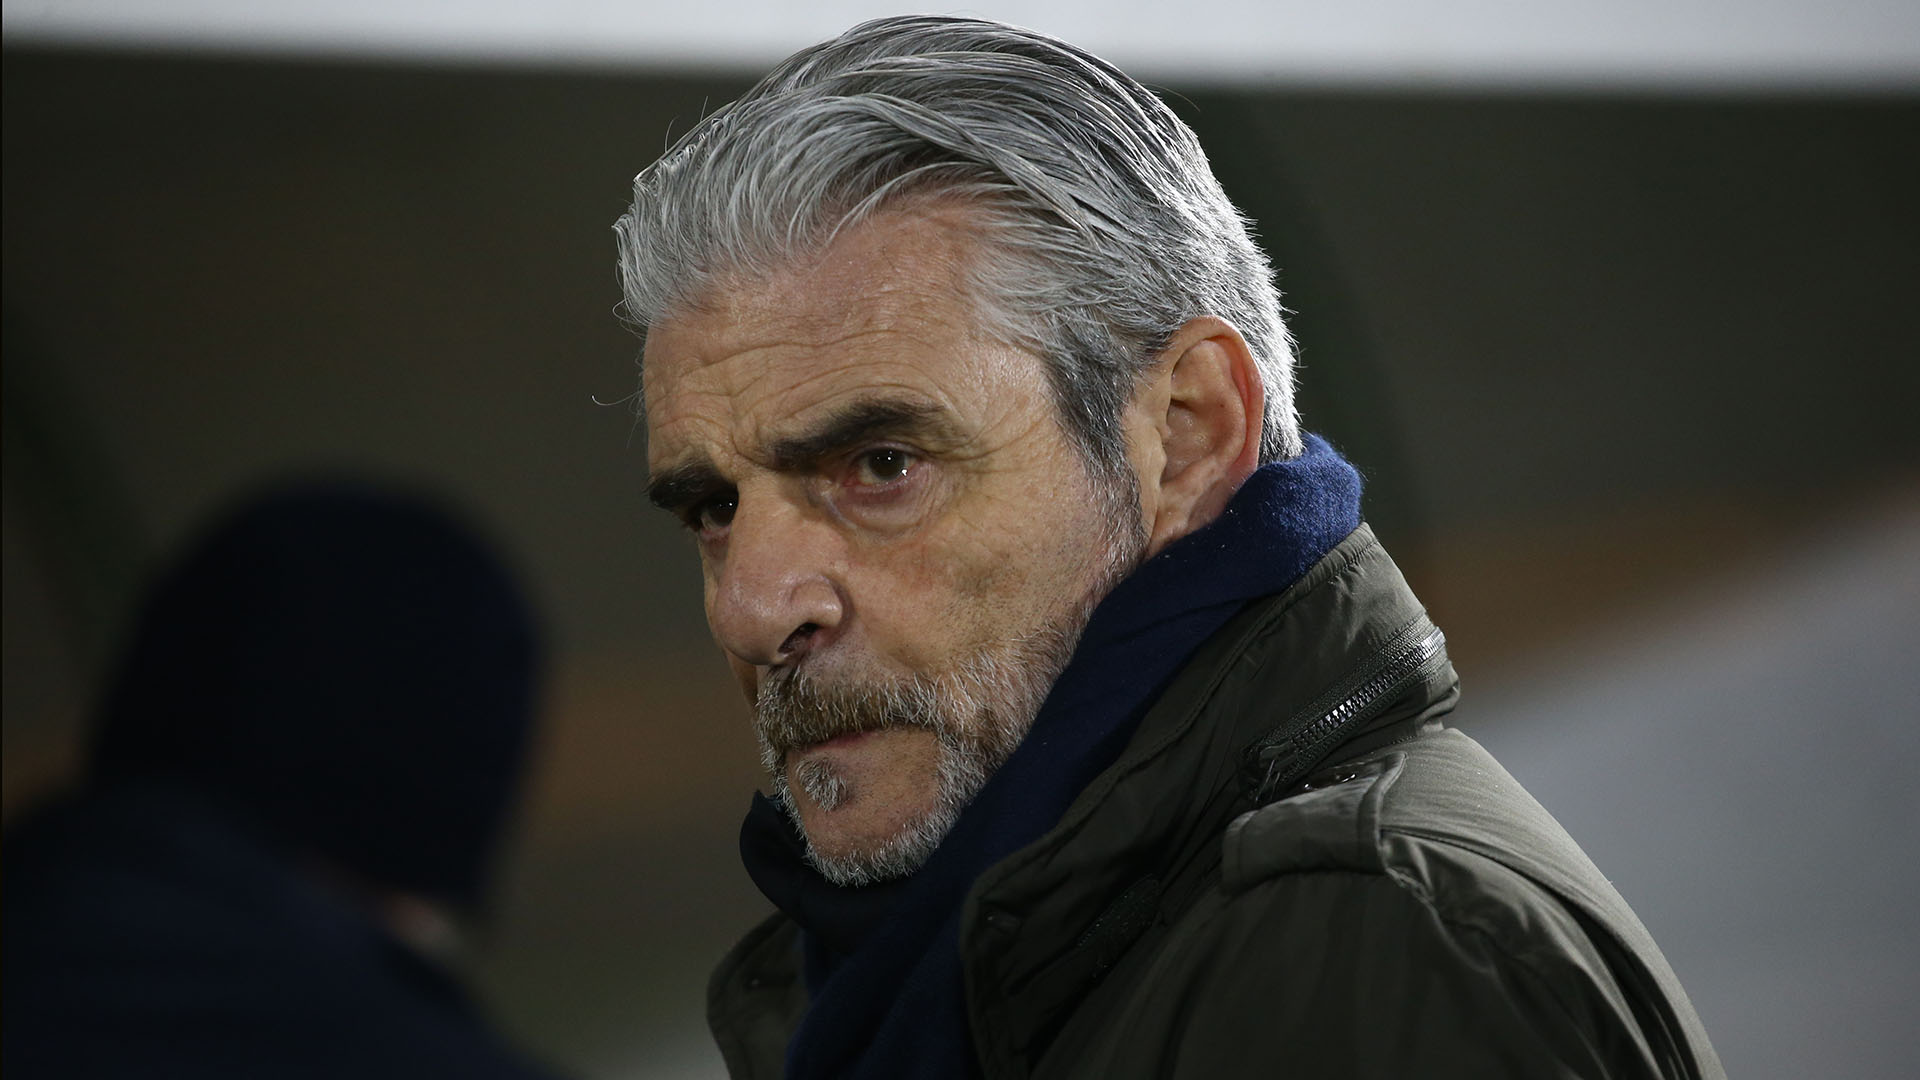 Juventus chief executive Maurizio Arrivabene commented the Champions League elimination and the negotiation with Paulo Dybala.